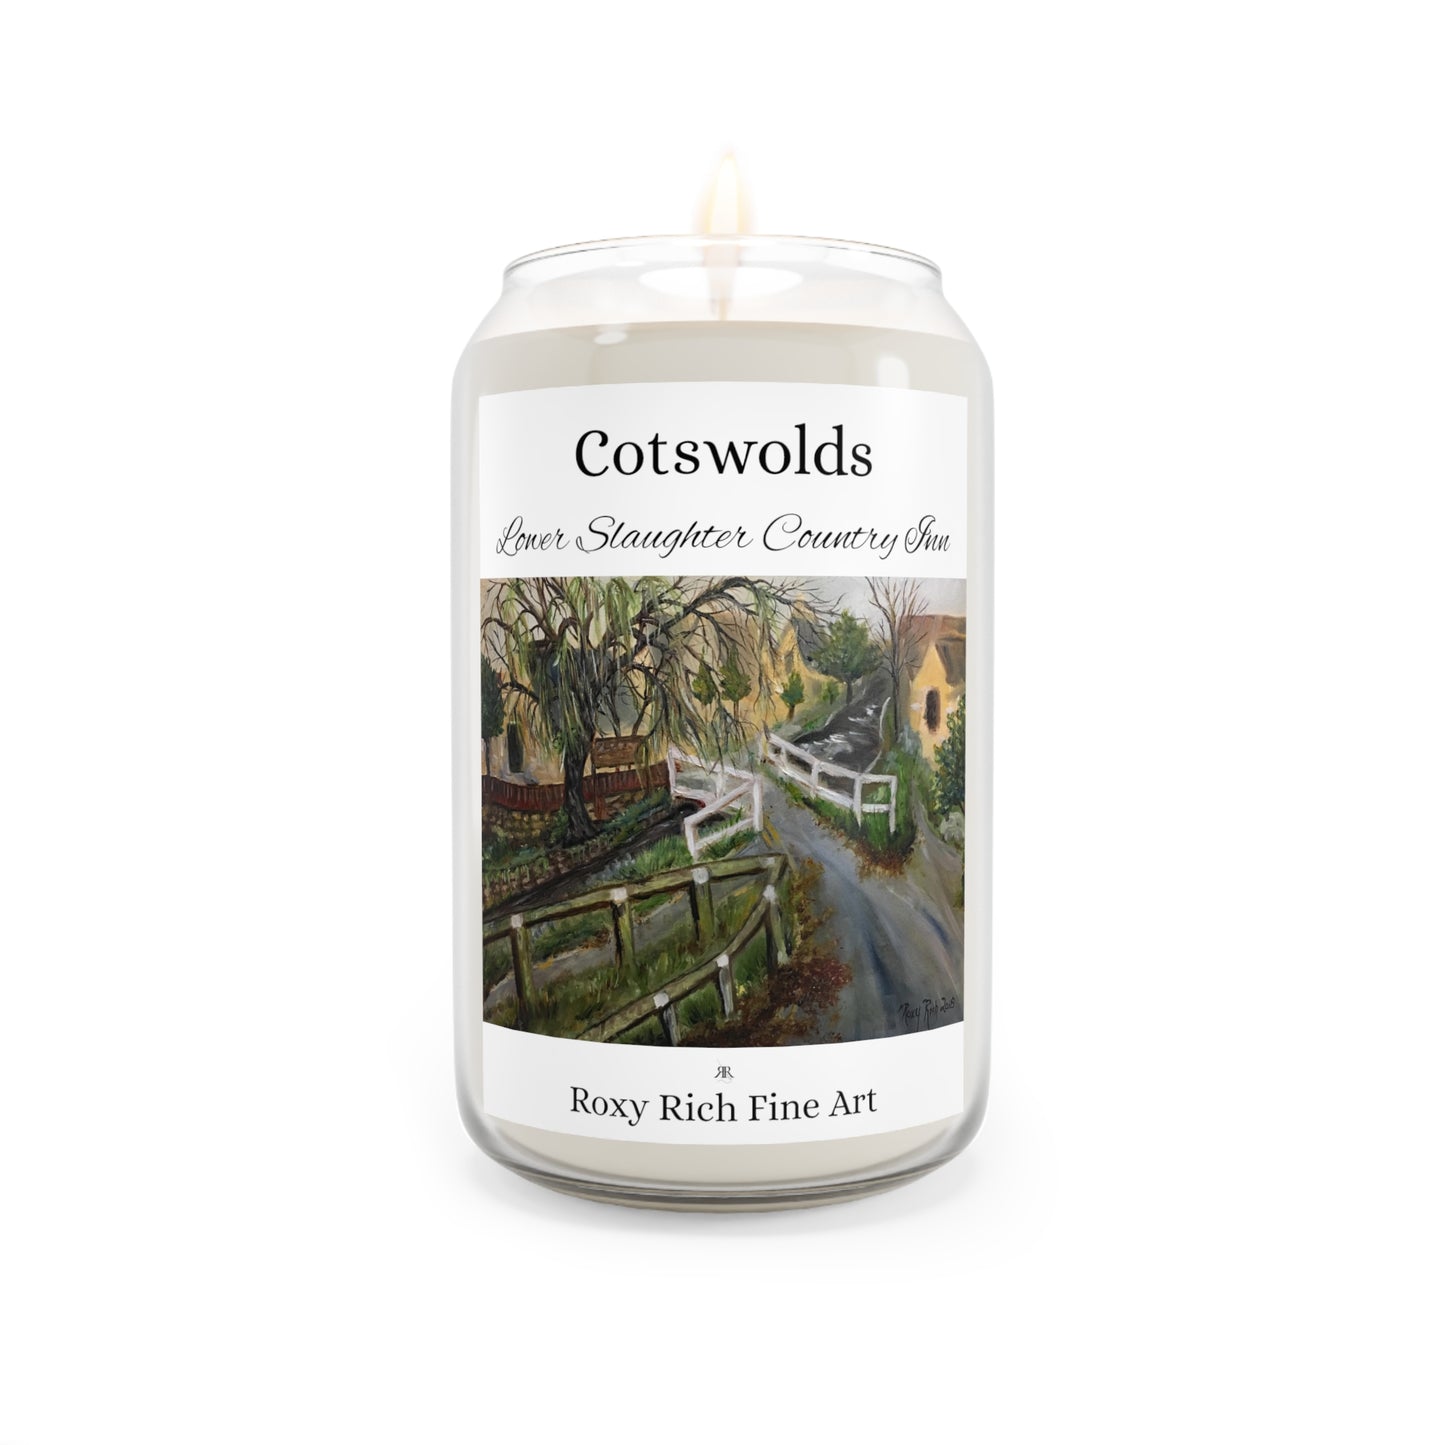 Lower Slaughter Country Inn Cotswolds Scented Candle, 13.75oz